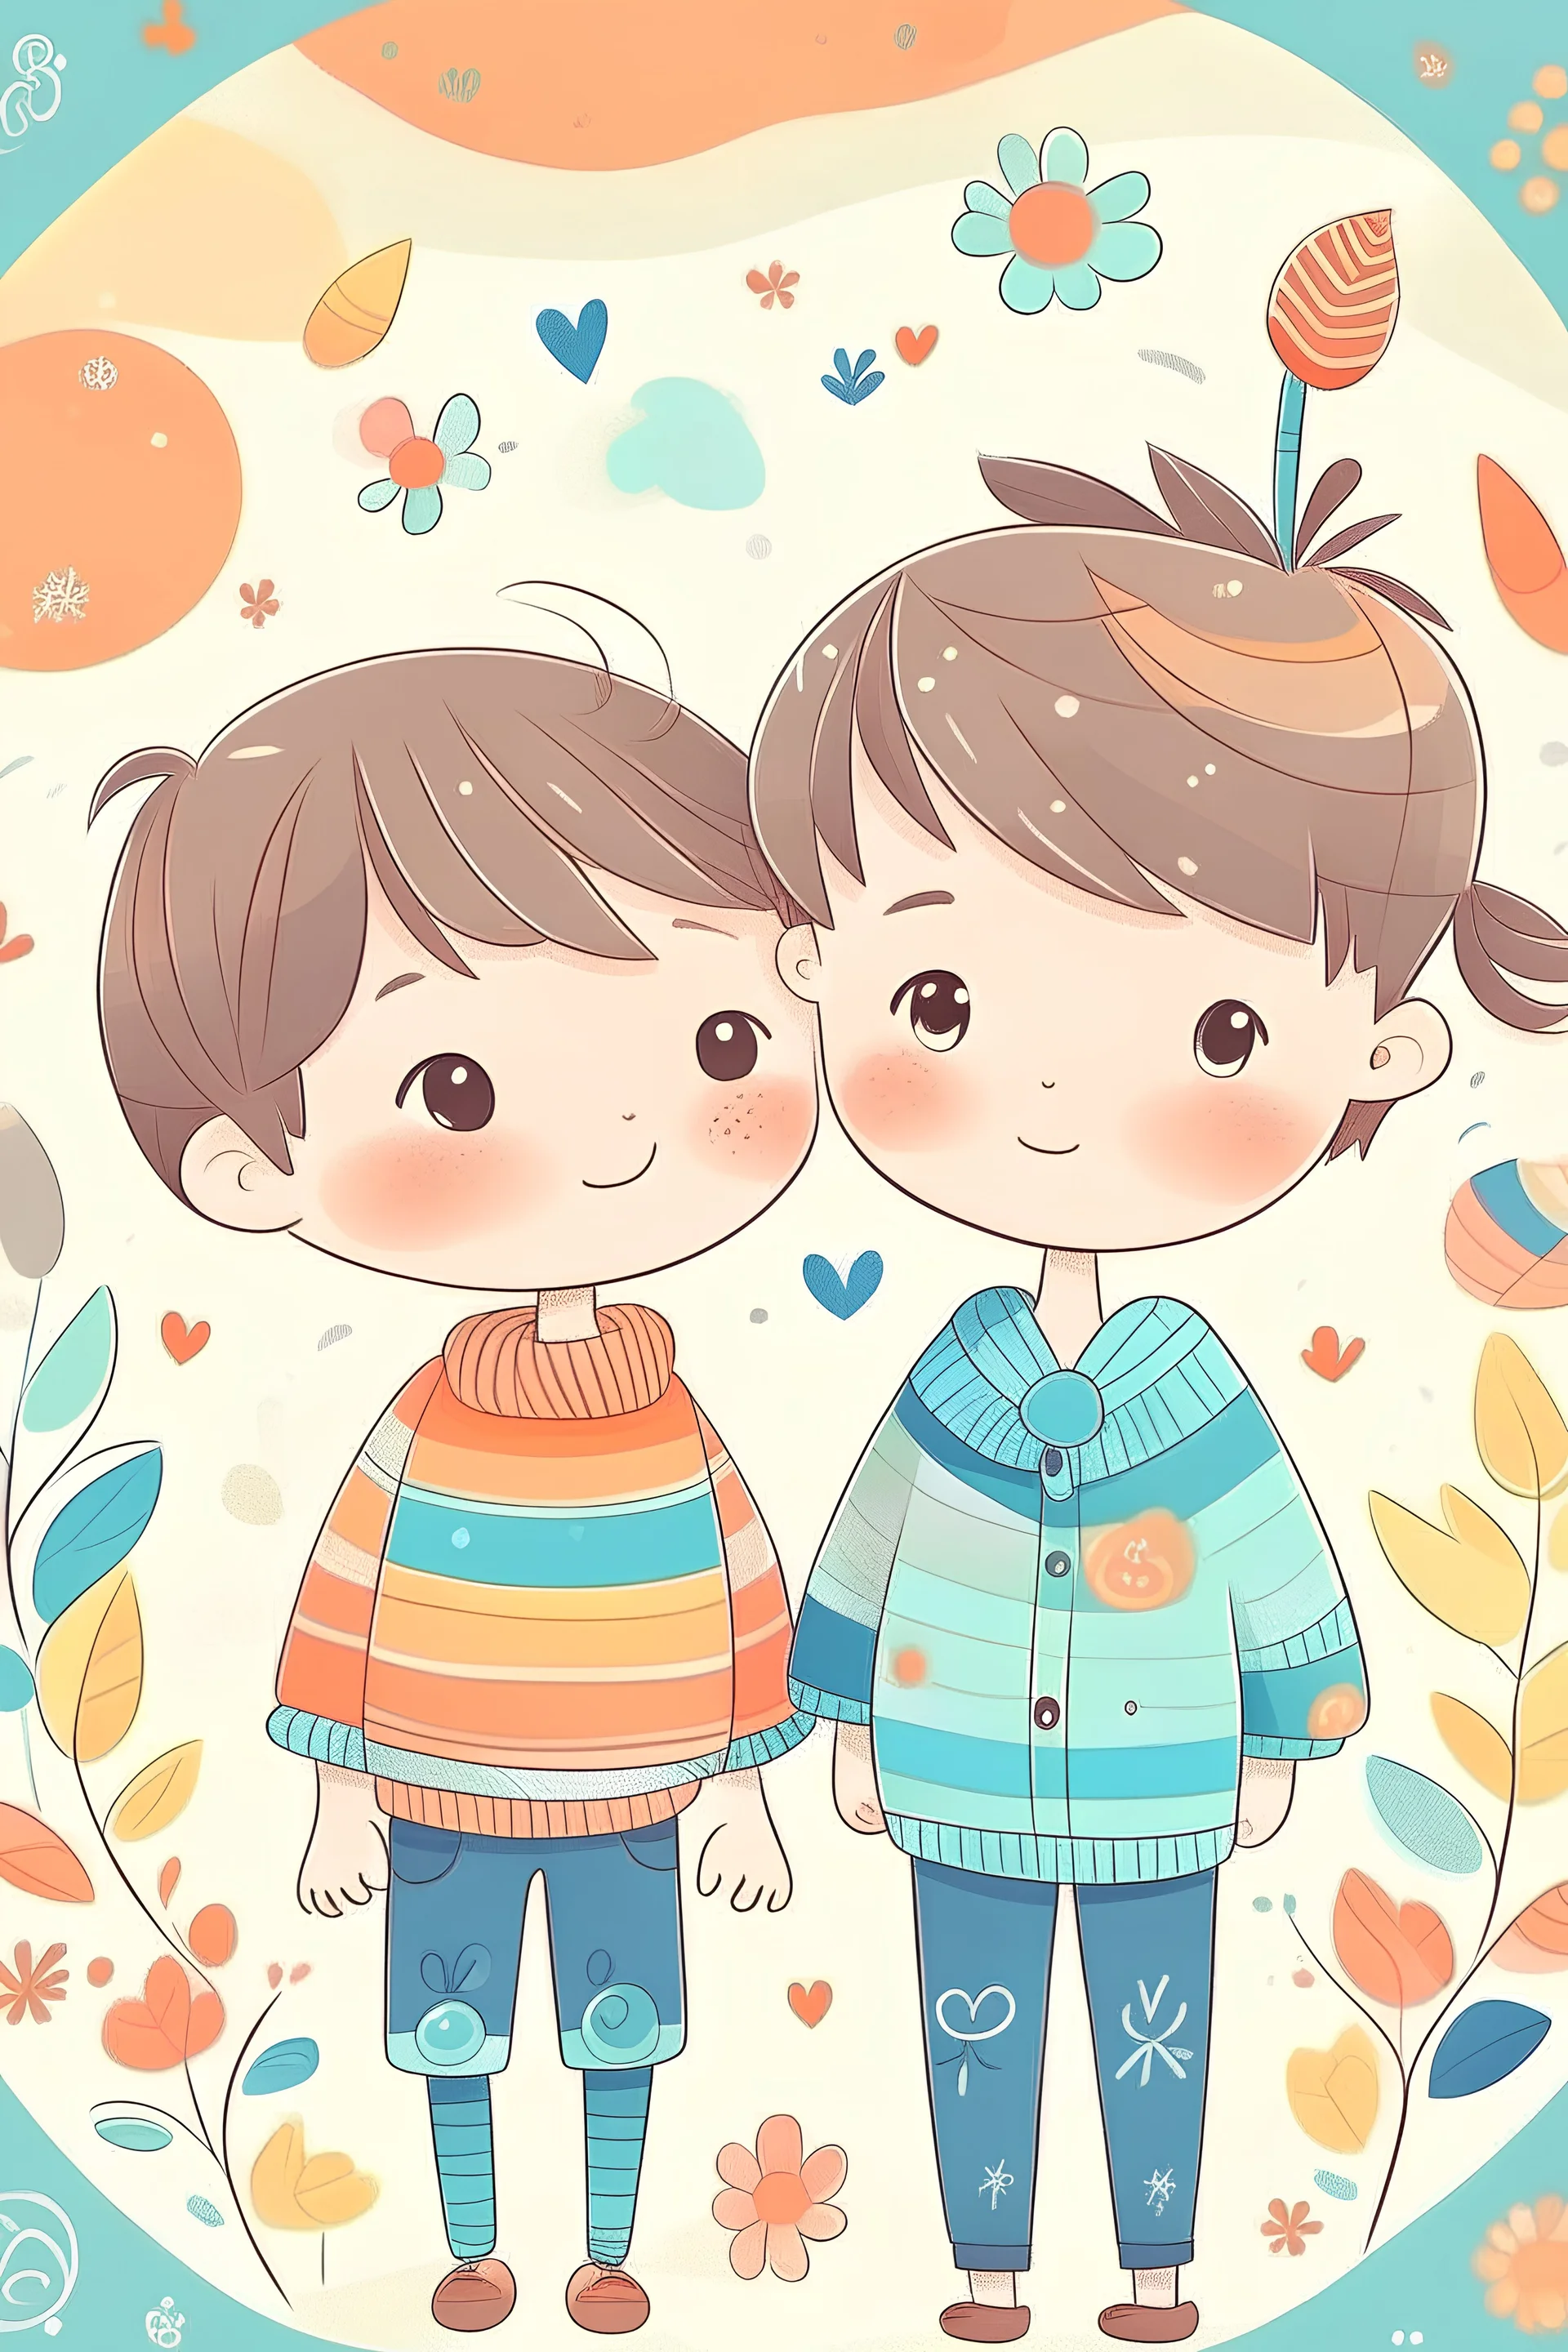 give an illustration for affirmations give both girl and boy